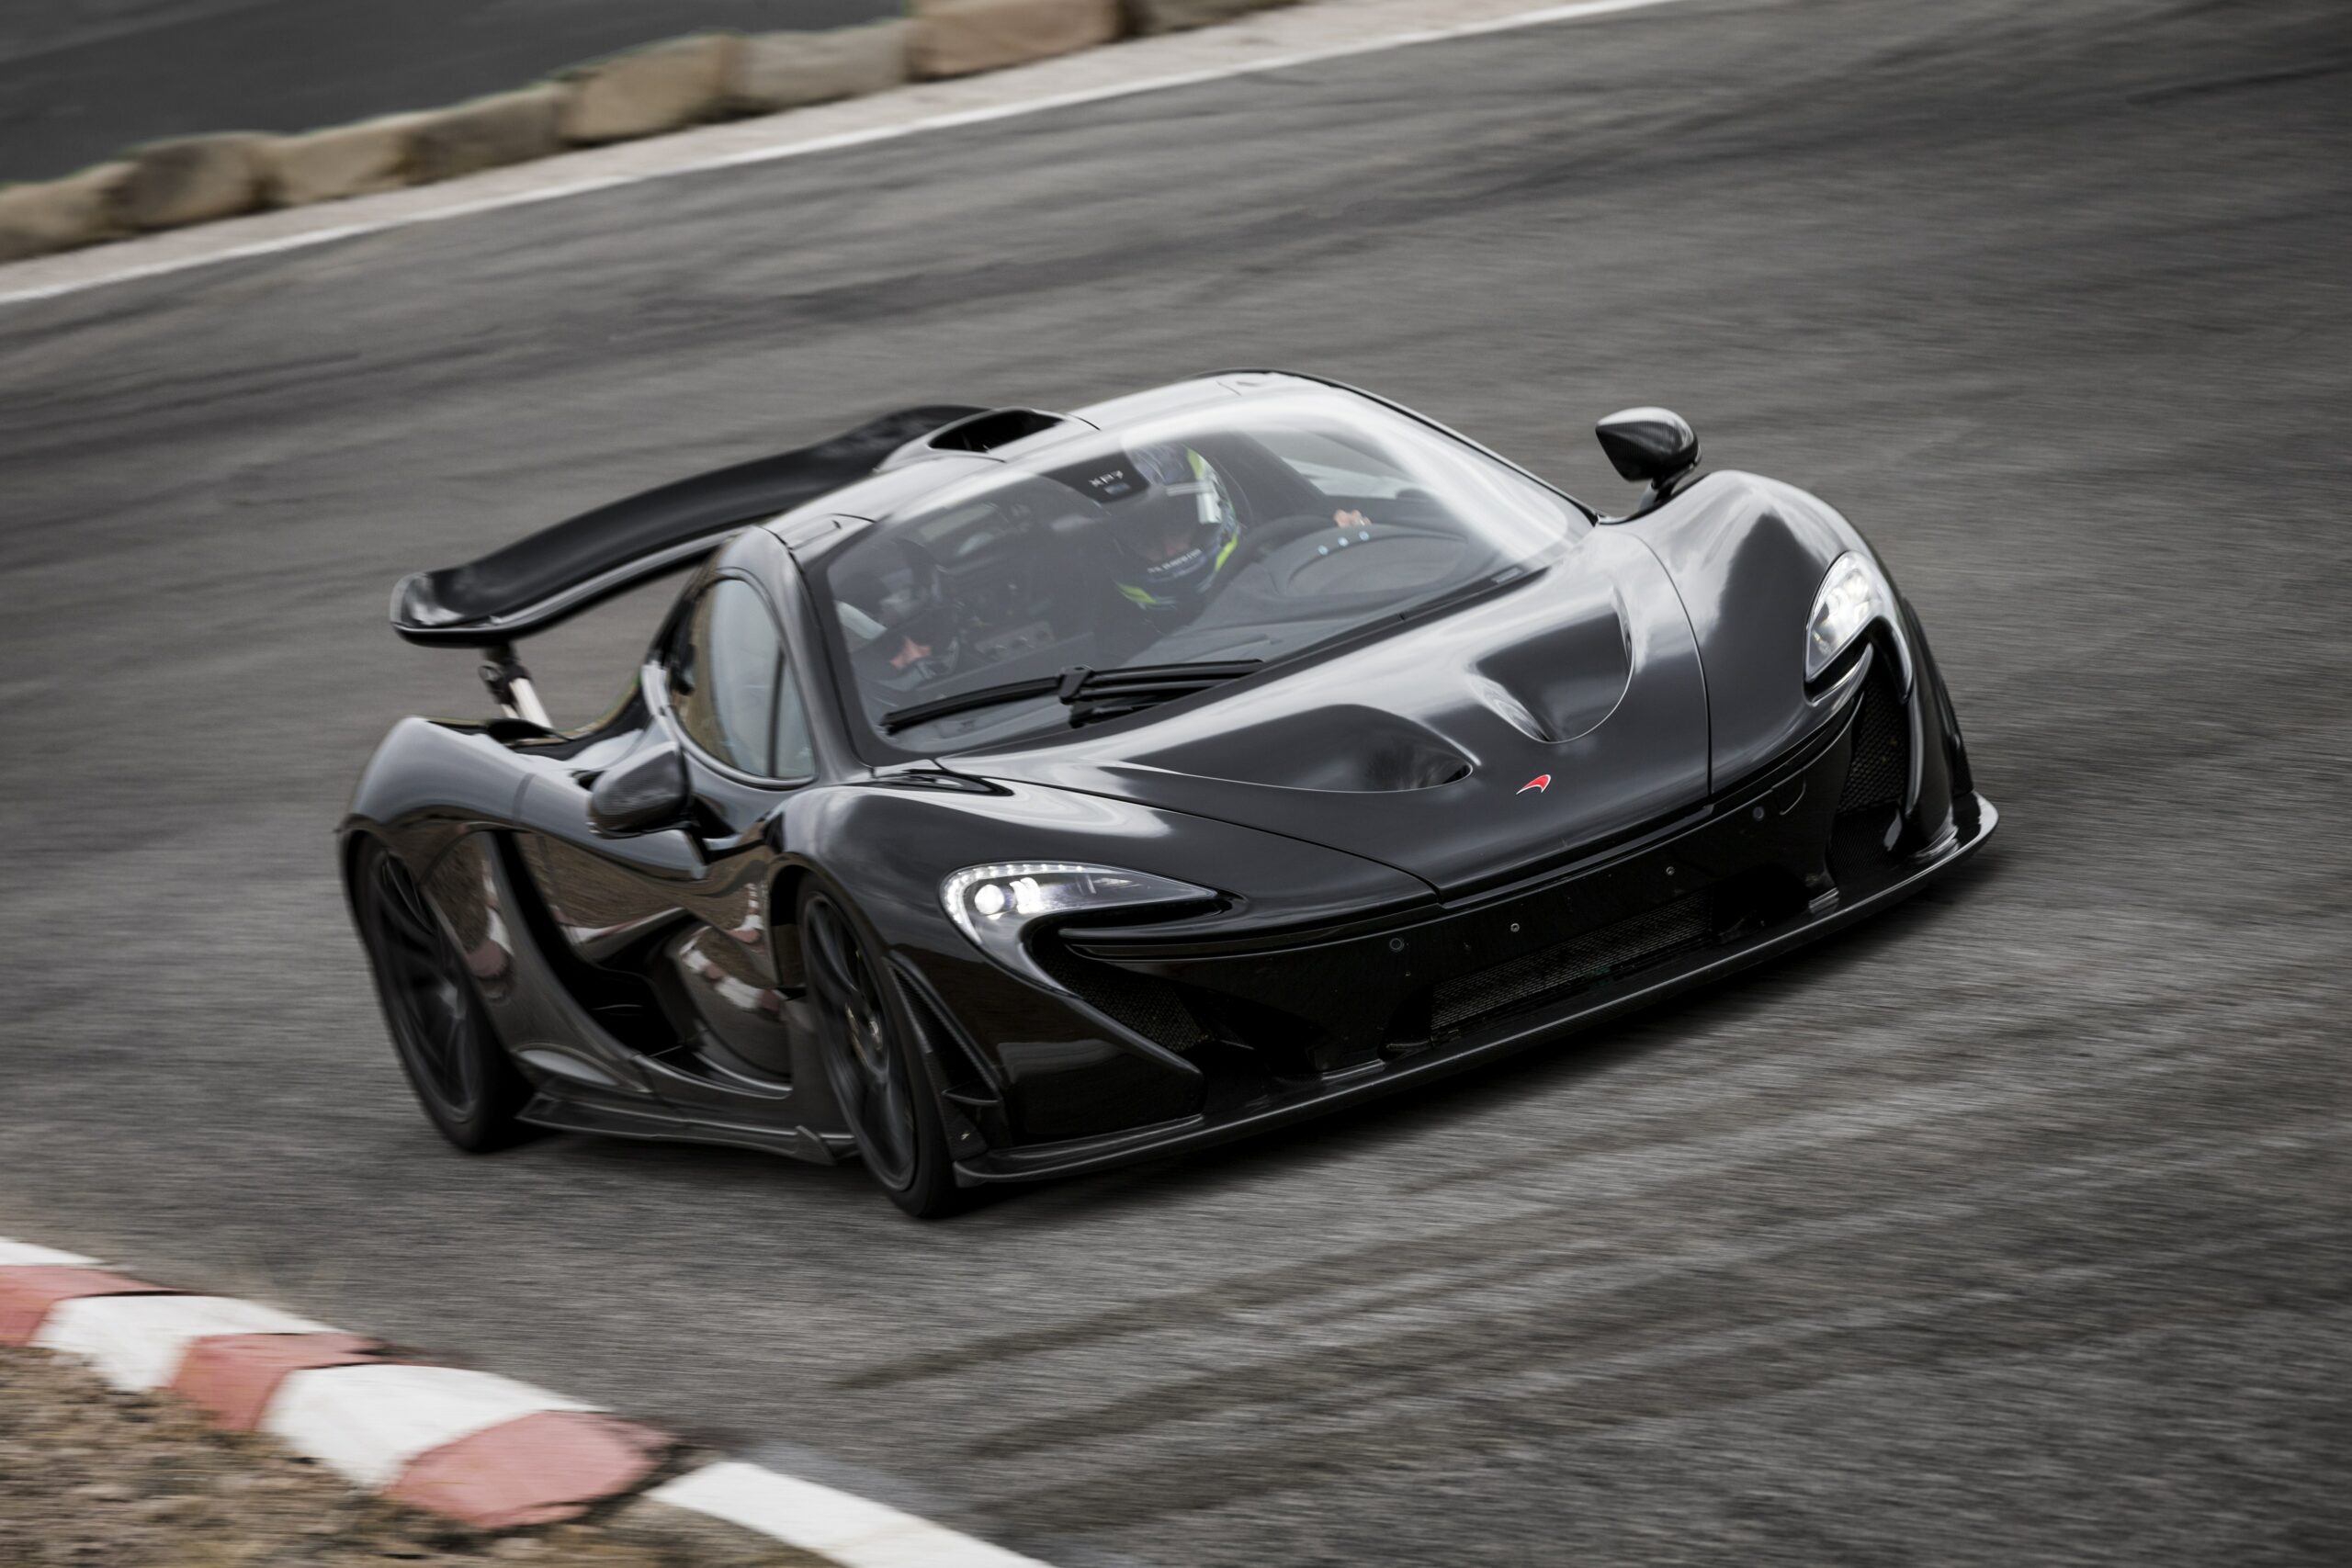 Ultimate Guide to the McLaren P1: Review, Price, Specs, Videos & More